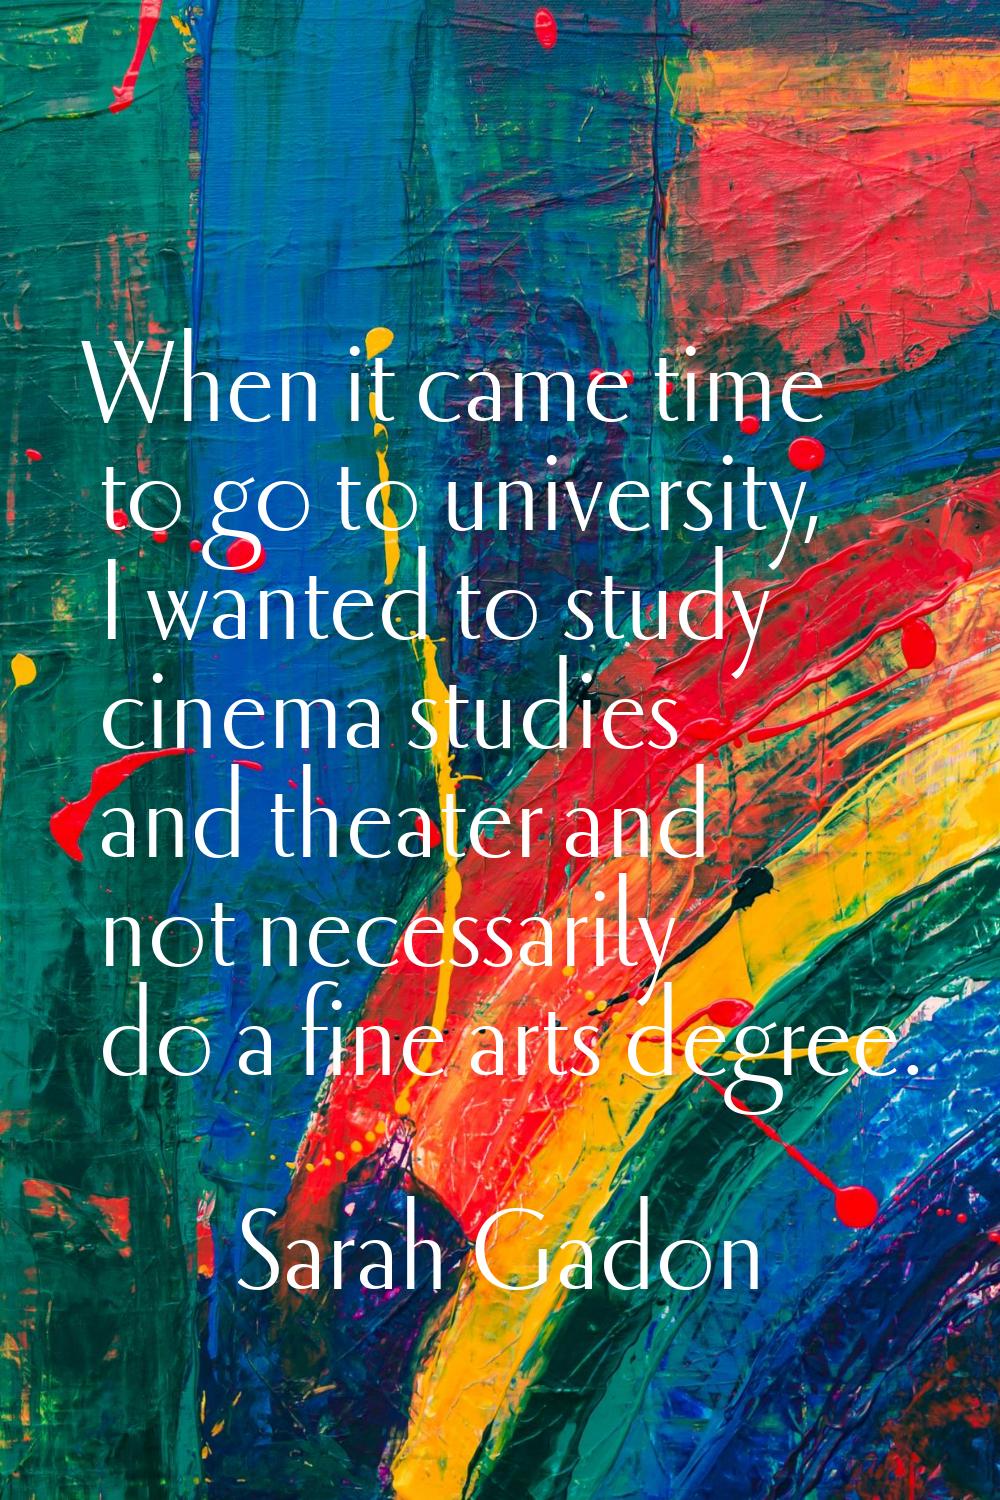 When it came time to go to university, I wanted to study cinema studies and theater and not necessa